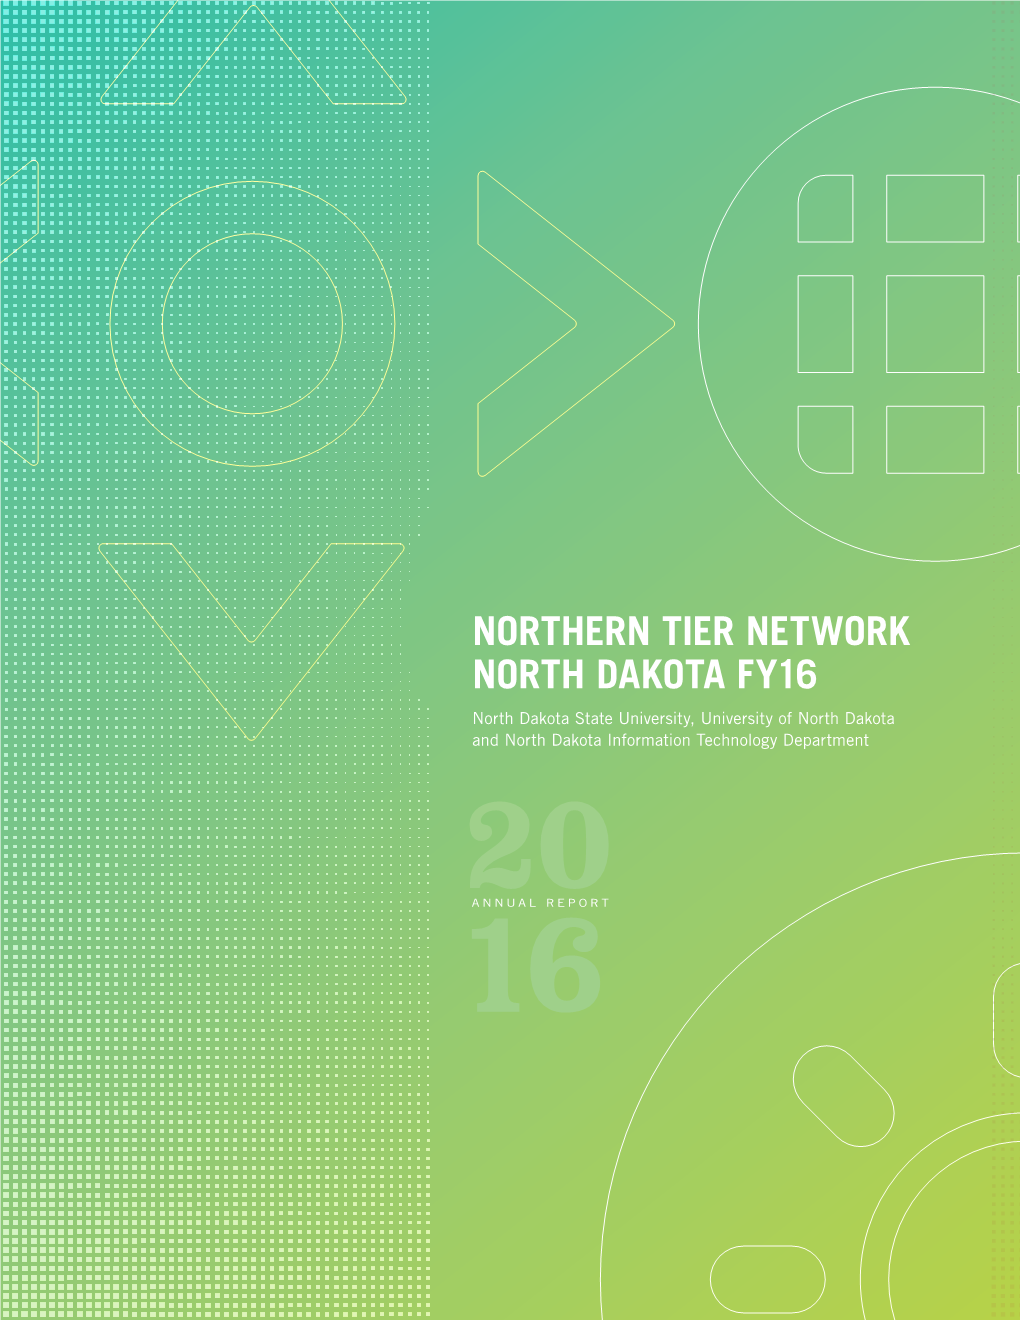 2016 Annual Report for the Northern Tier Network